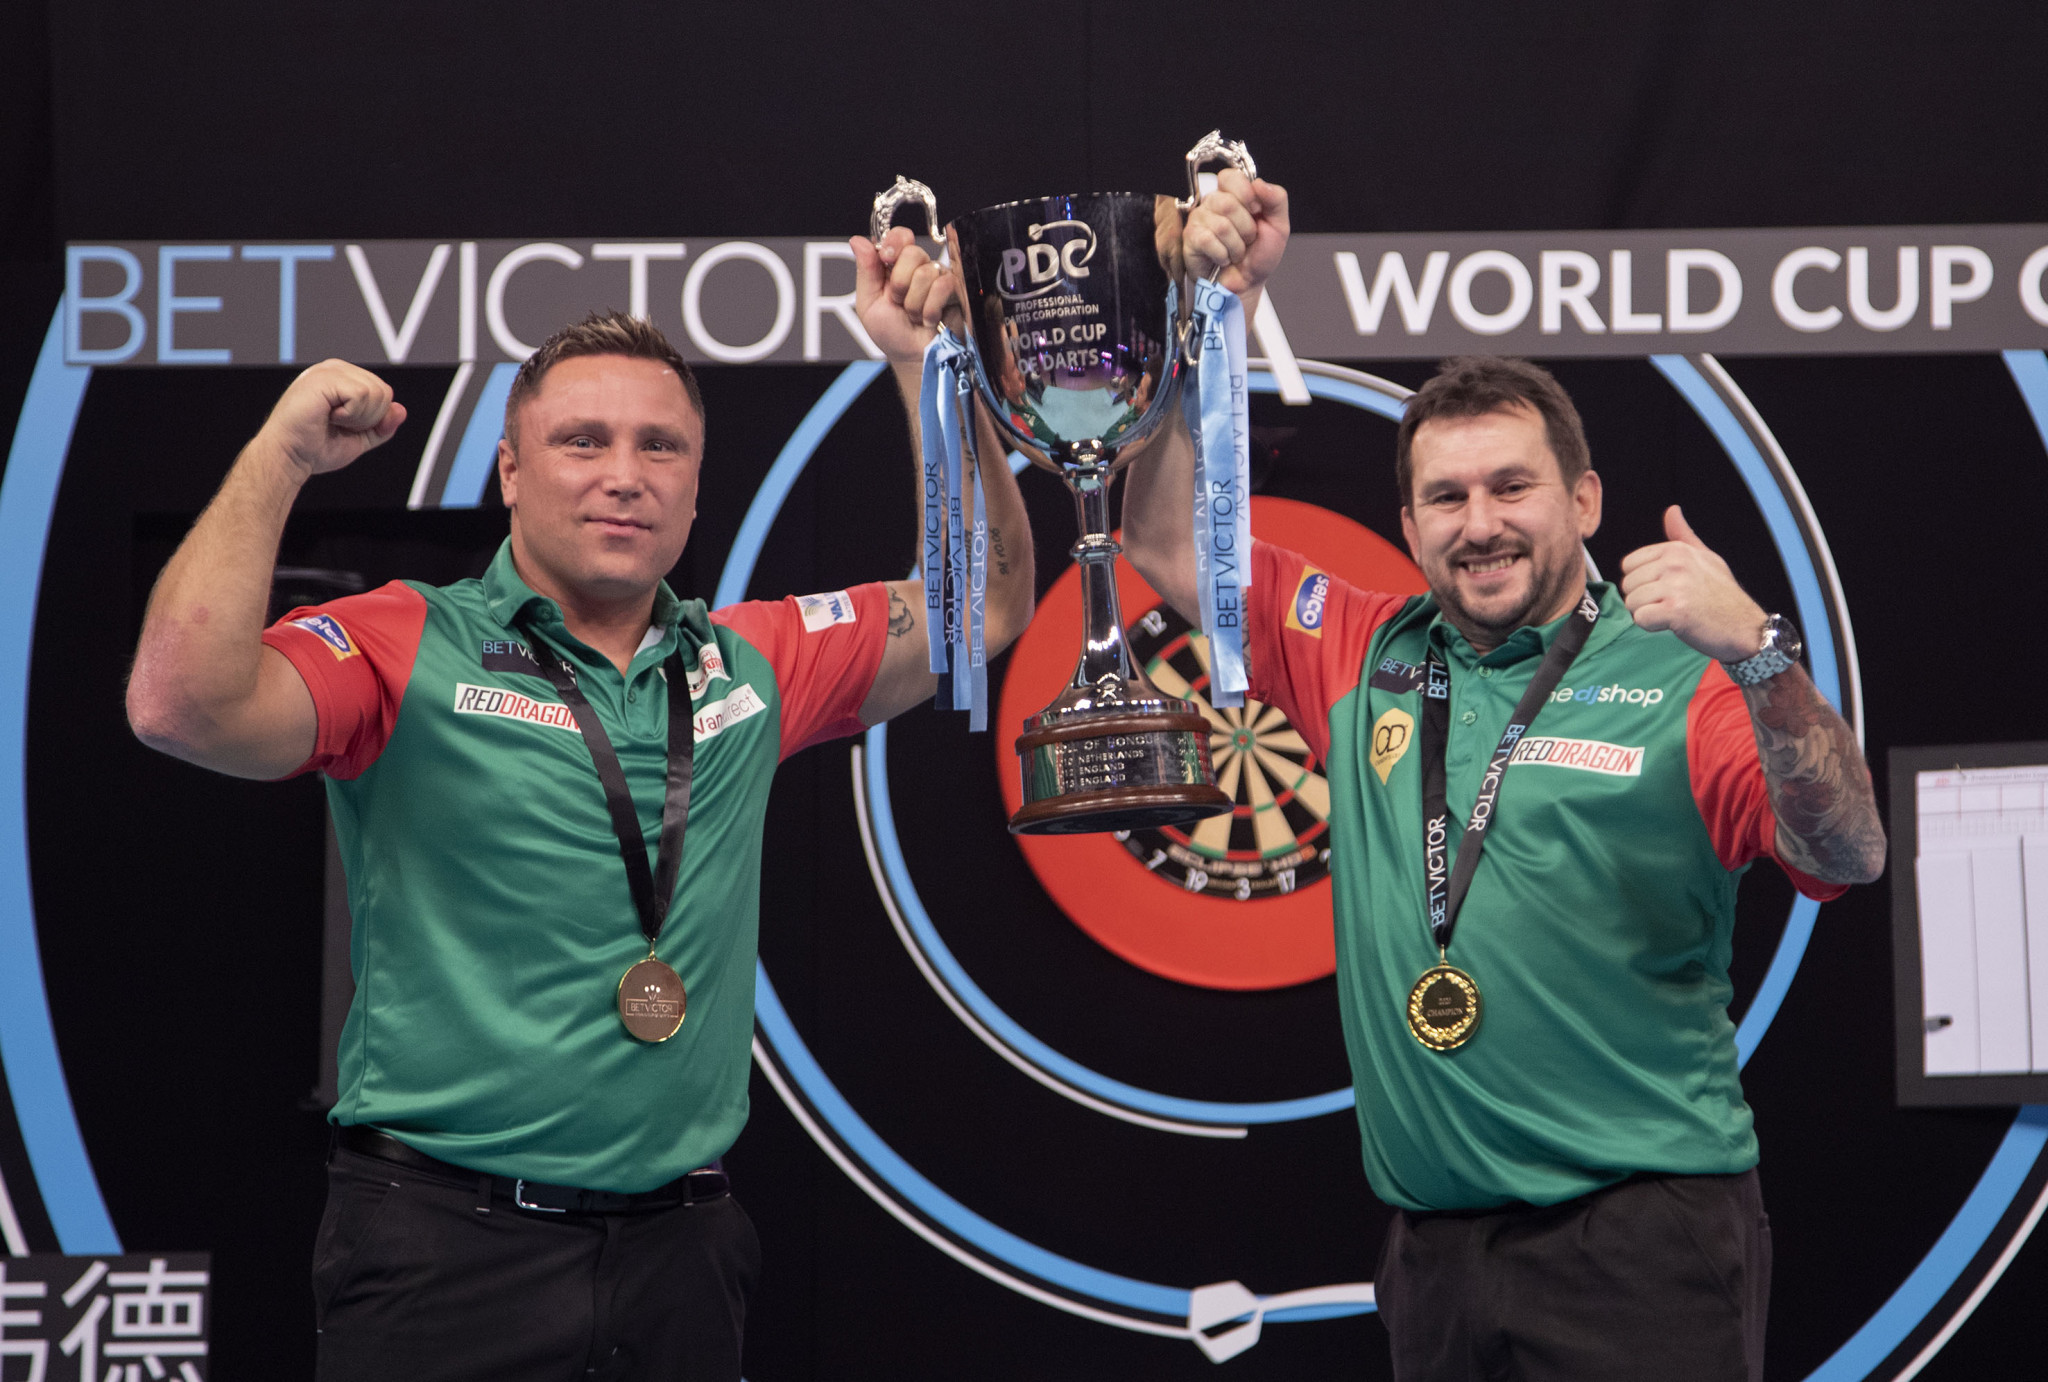 Wales win World Cup of Darts for first time